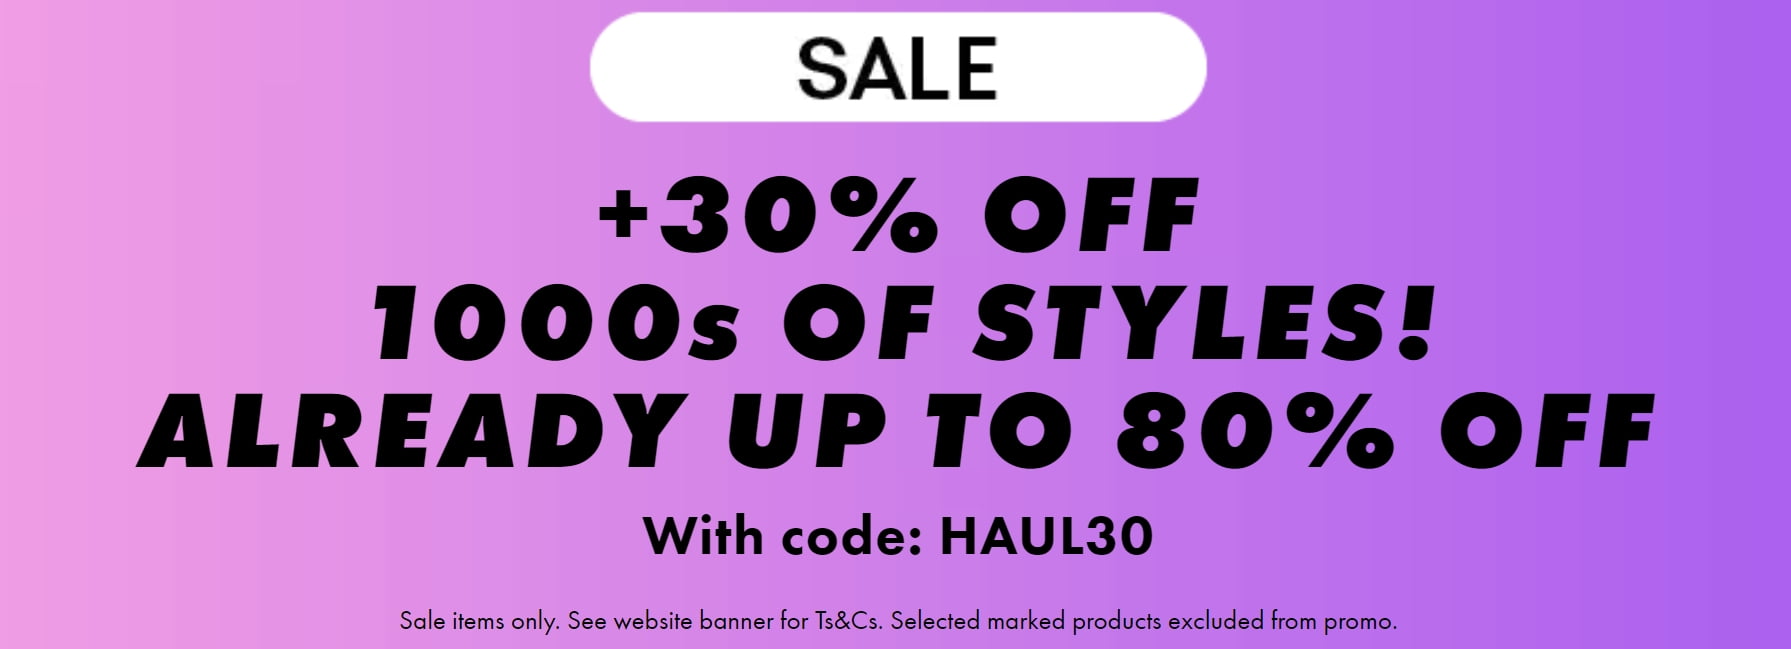 Up to 80% off sale at ASOS + an extra 30% off